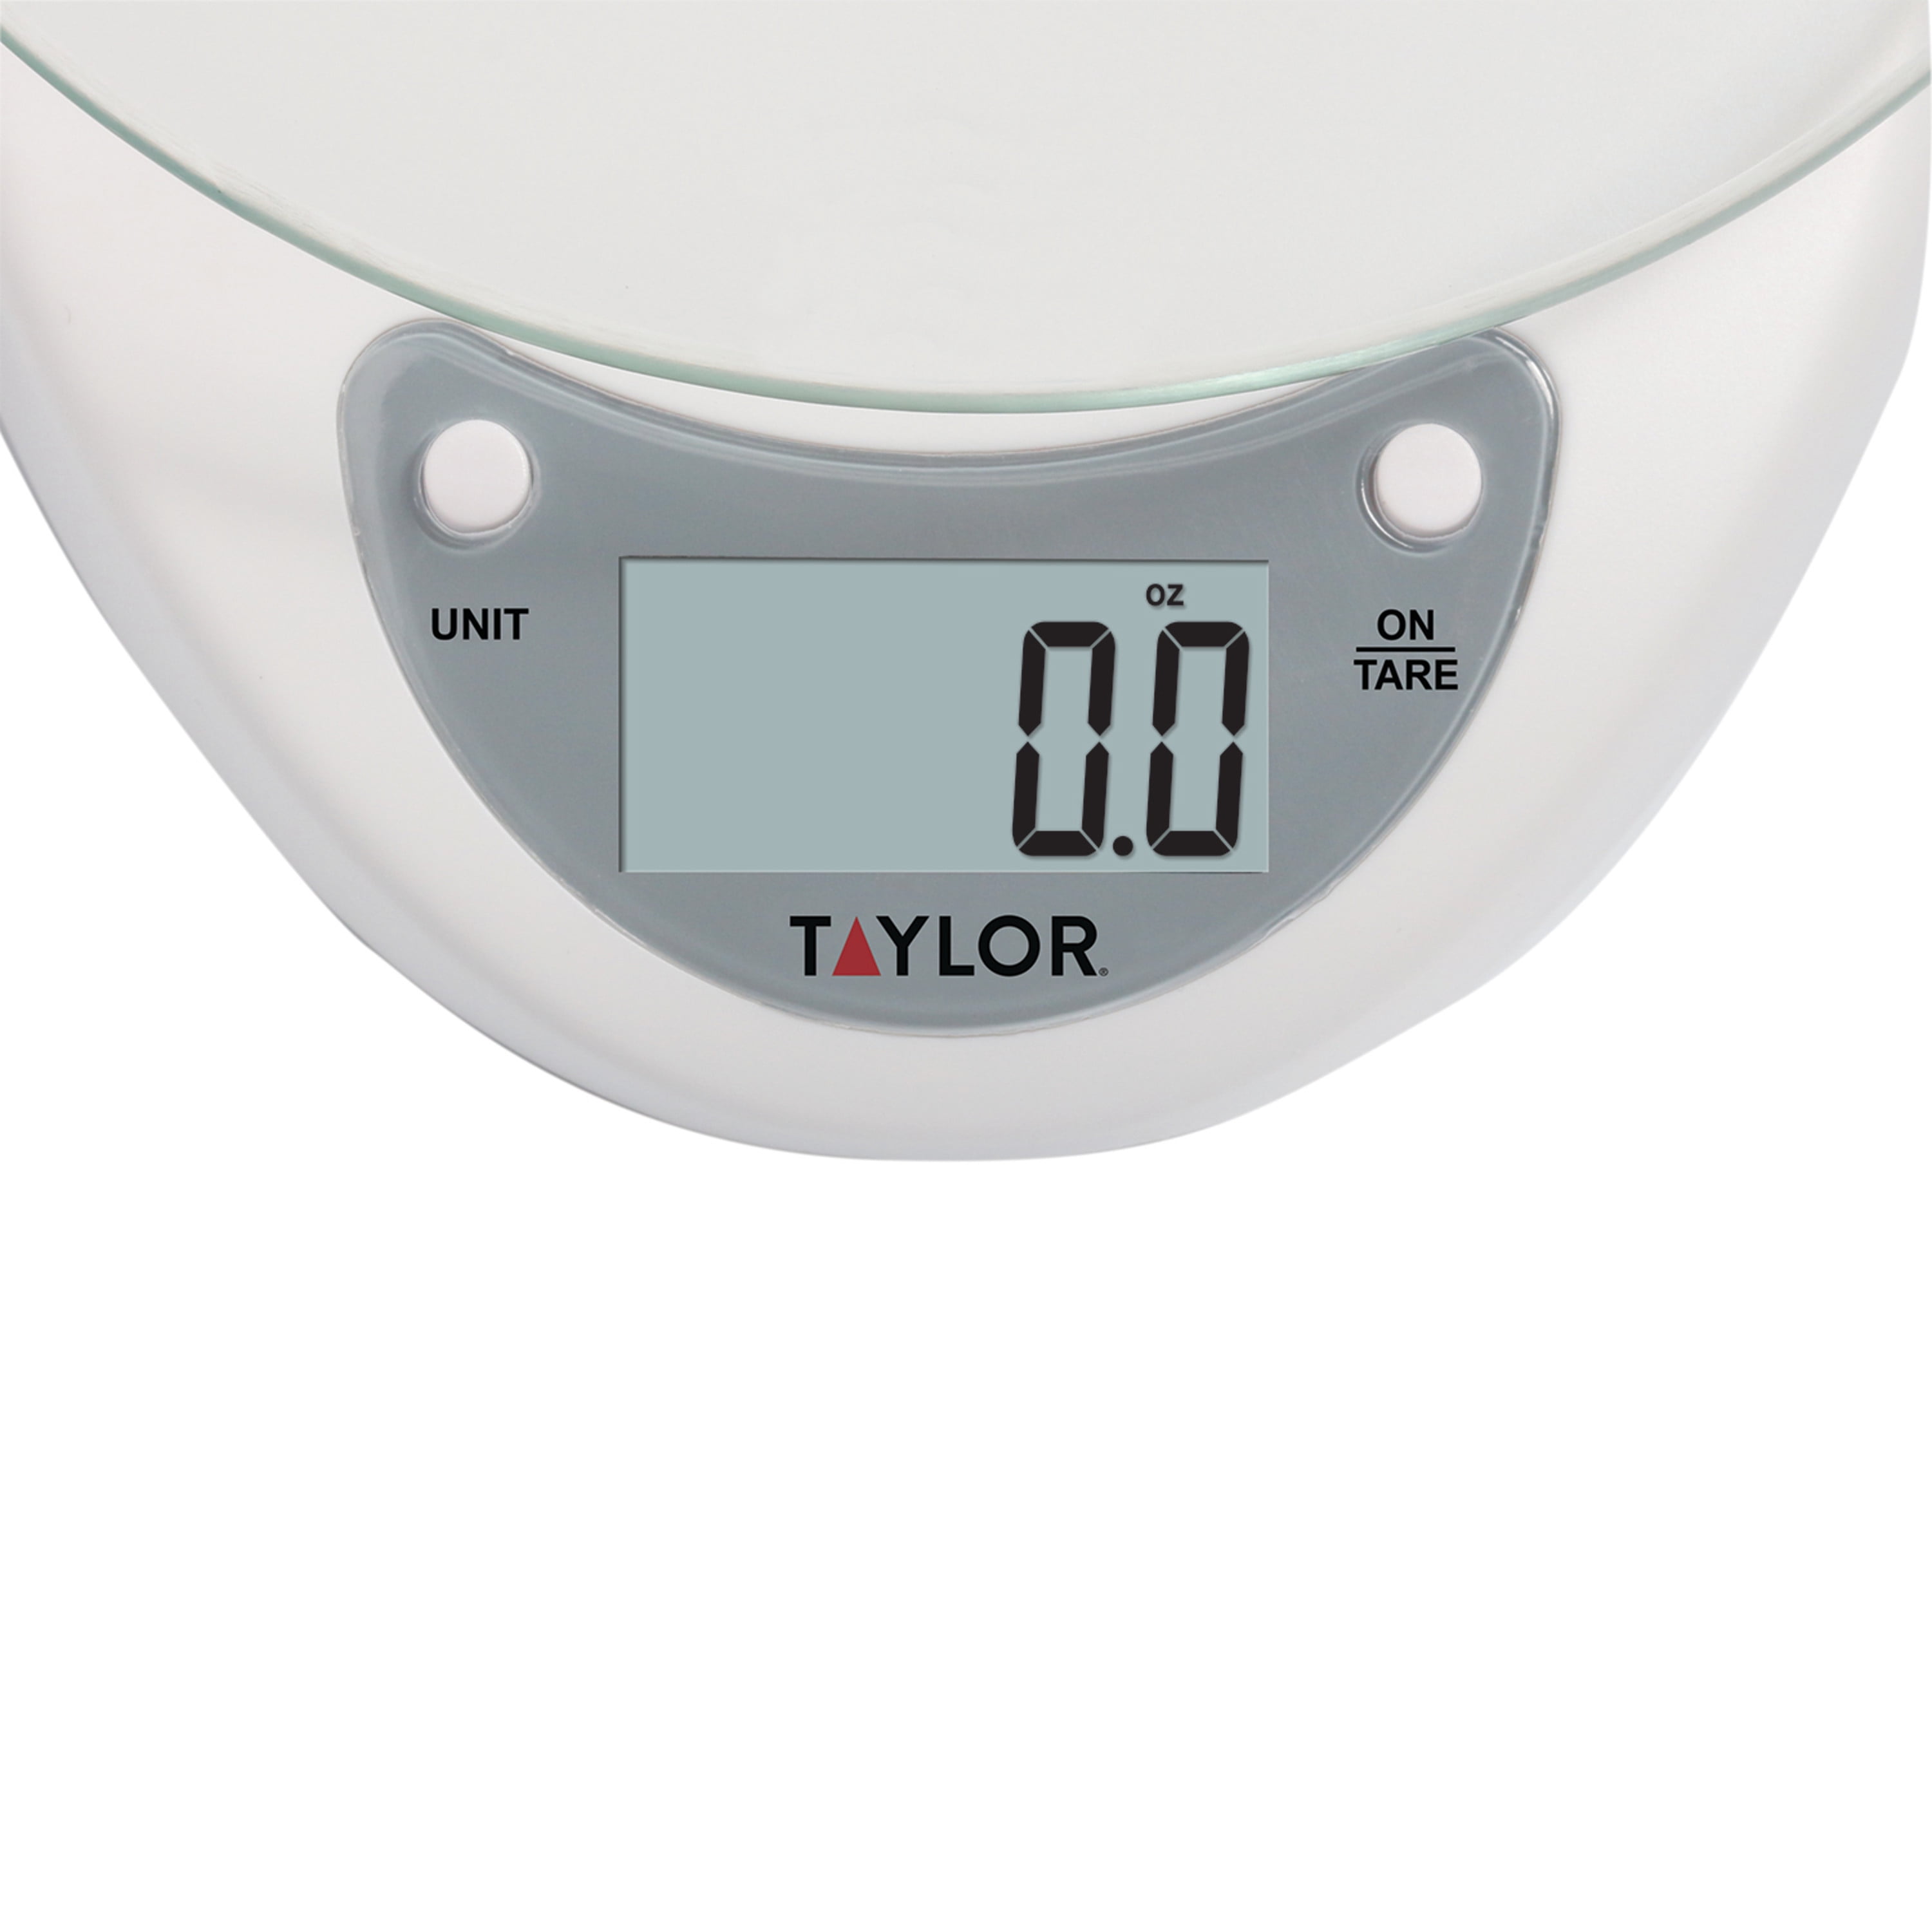 Taylor(R) Precision Products 380444 4.4lb-Capacity Digital Kitchen Scale  with B - 6396936